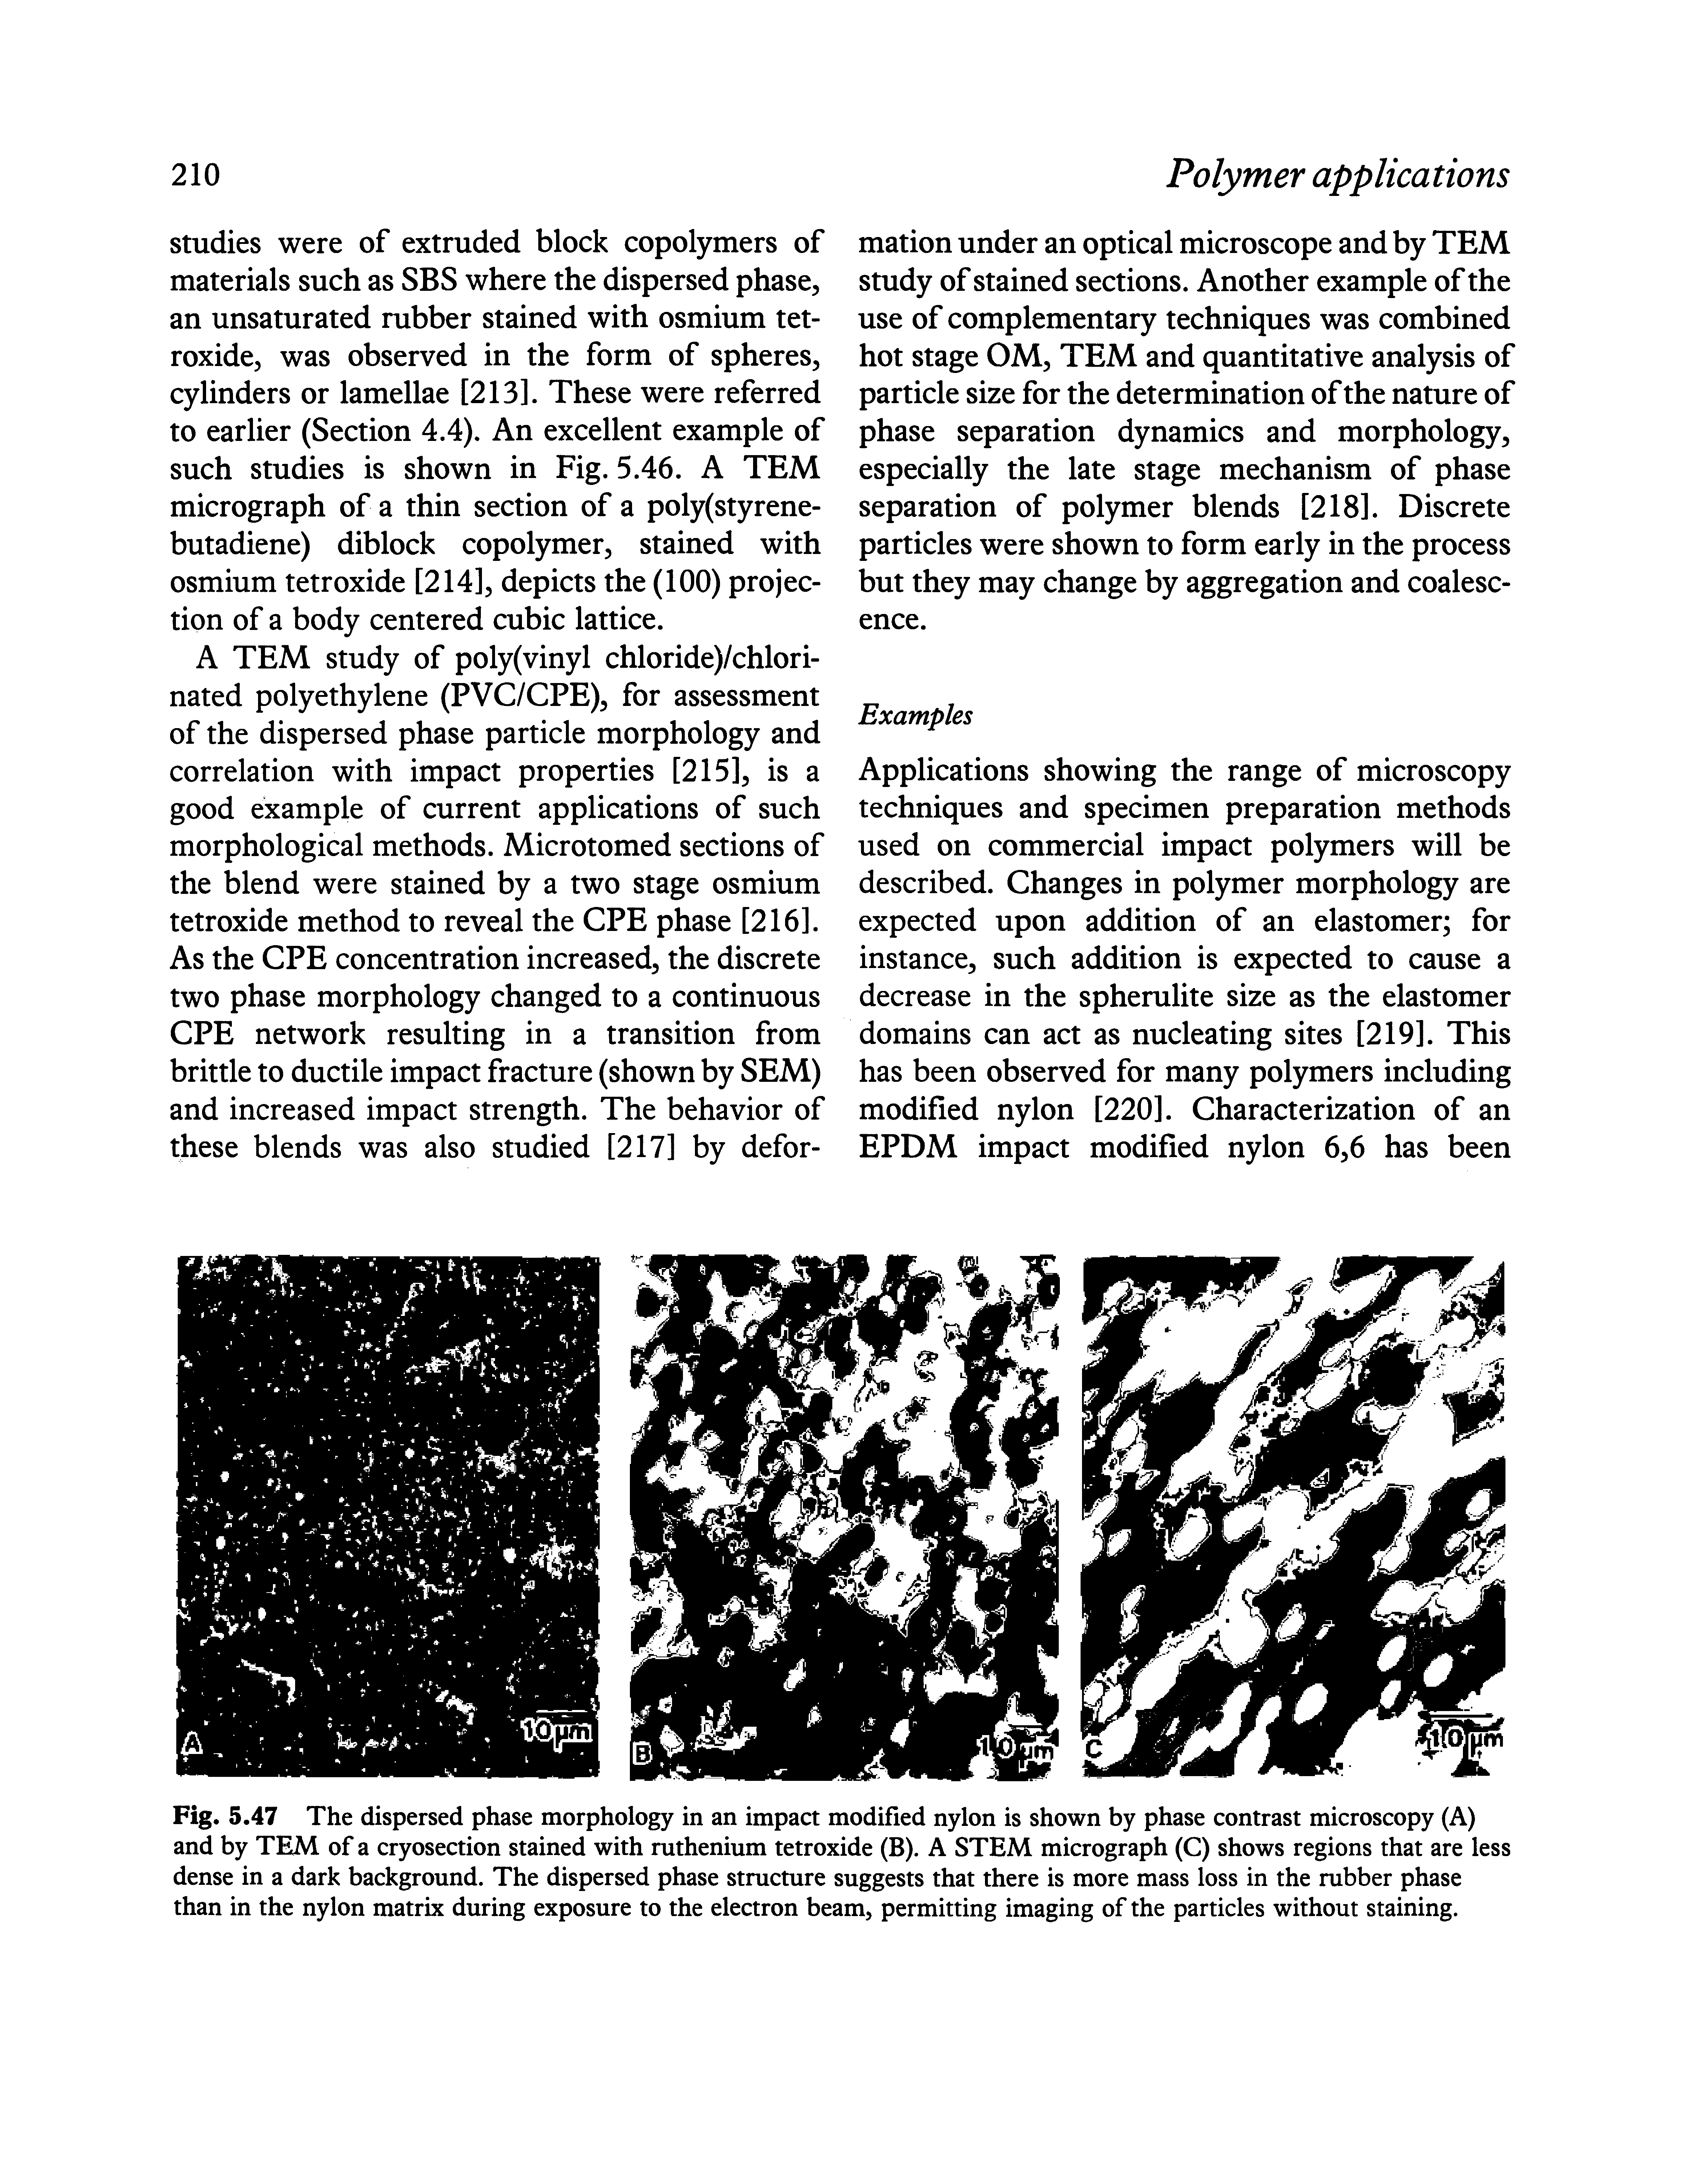 Fig. 5.47 The dispersed phase morphology in an impact modified nylon is shown by phase contrast microscopy (A) and by TEM of a cryosection stained with ruthenium tetroxide (B). A STEM micrograph (C) shows regions that are less dense in a dark background. The dispersed phase structure suggests that there is more mass loss in the rubber phase than in the nylon matrix during exposure to the electron beam, permitting imaging of the particles without staining.